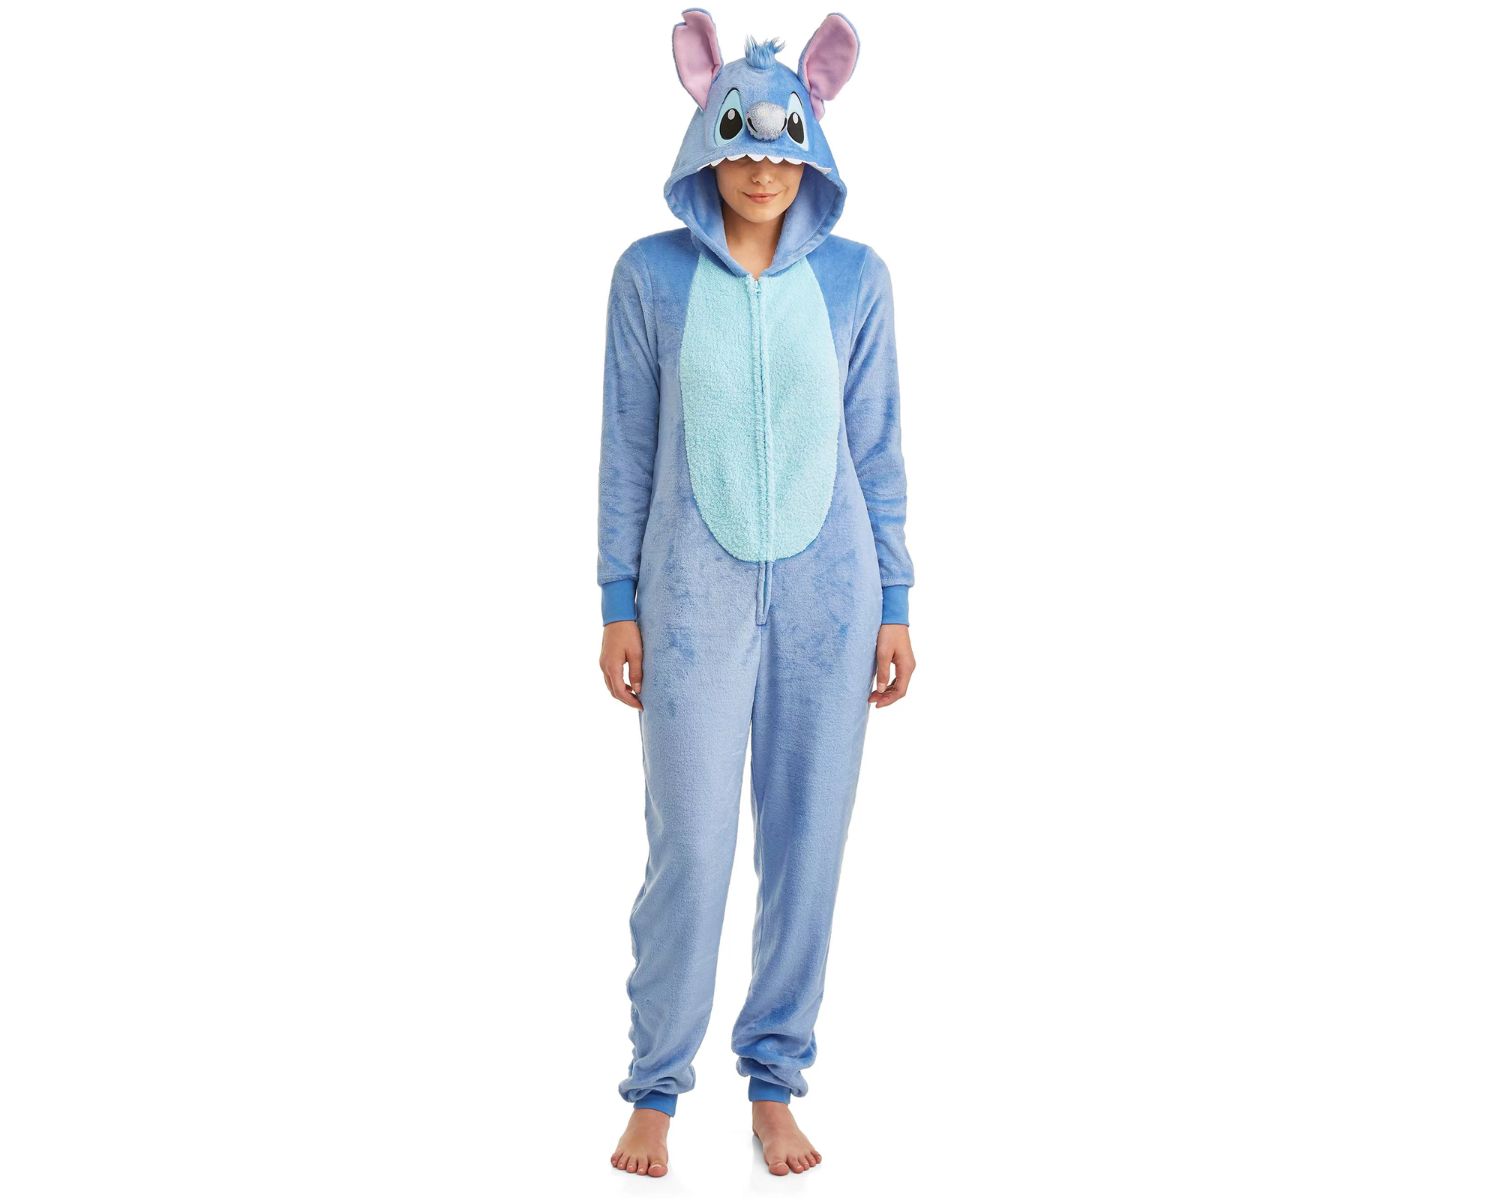 17-enigmatic-facts-about-stitch-onesie